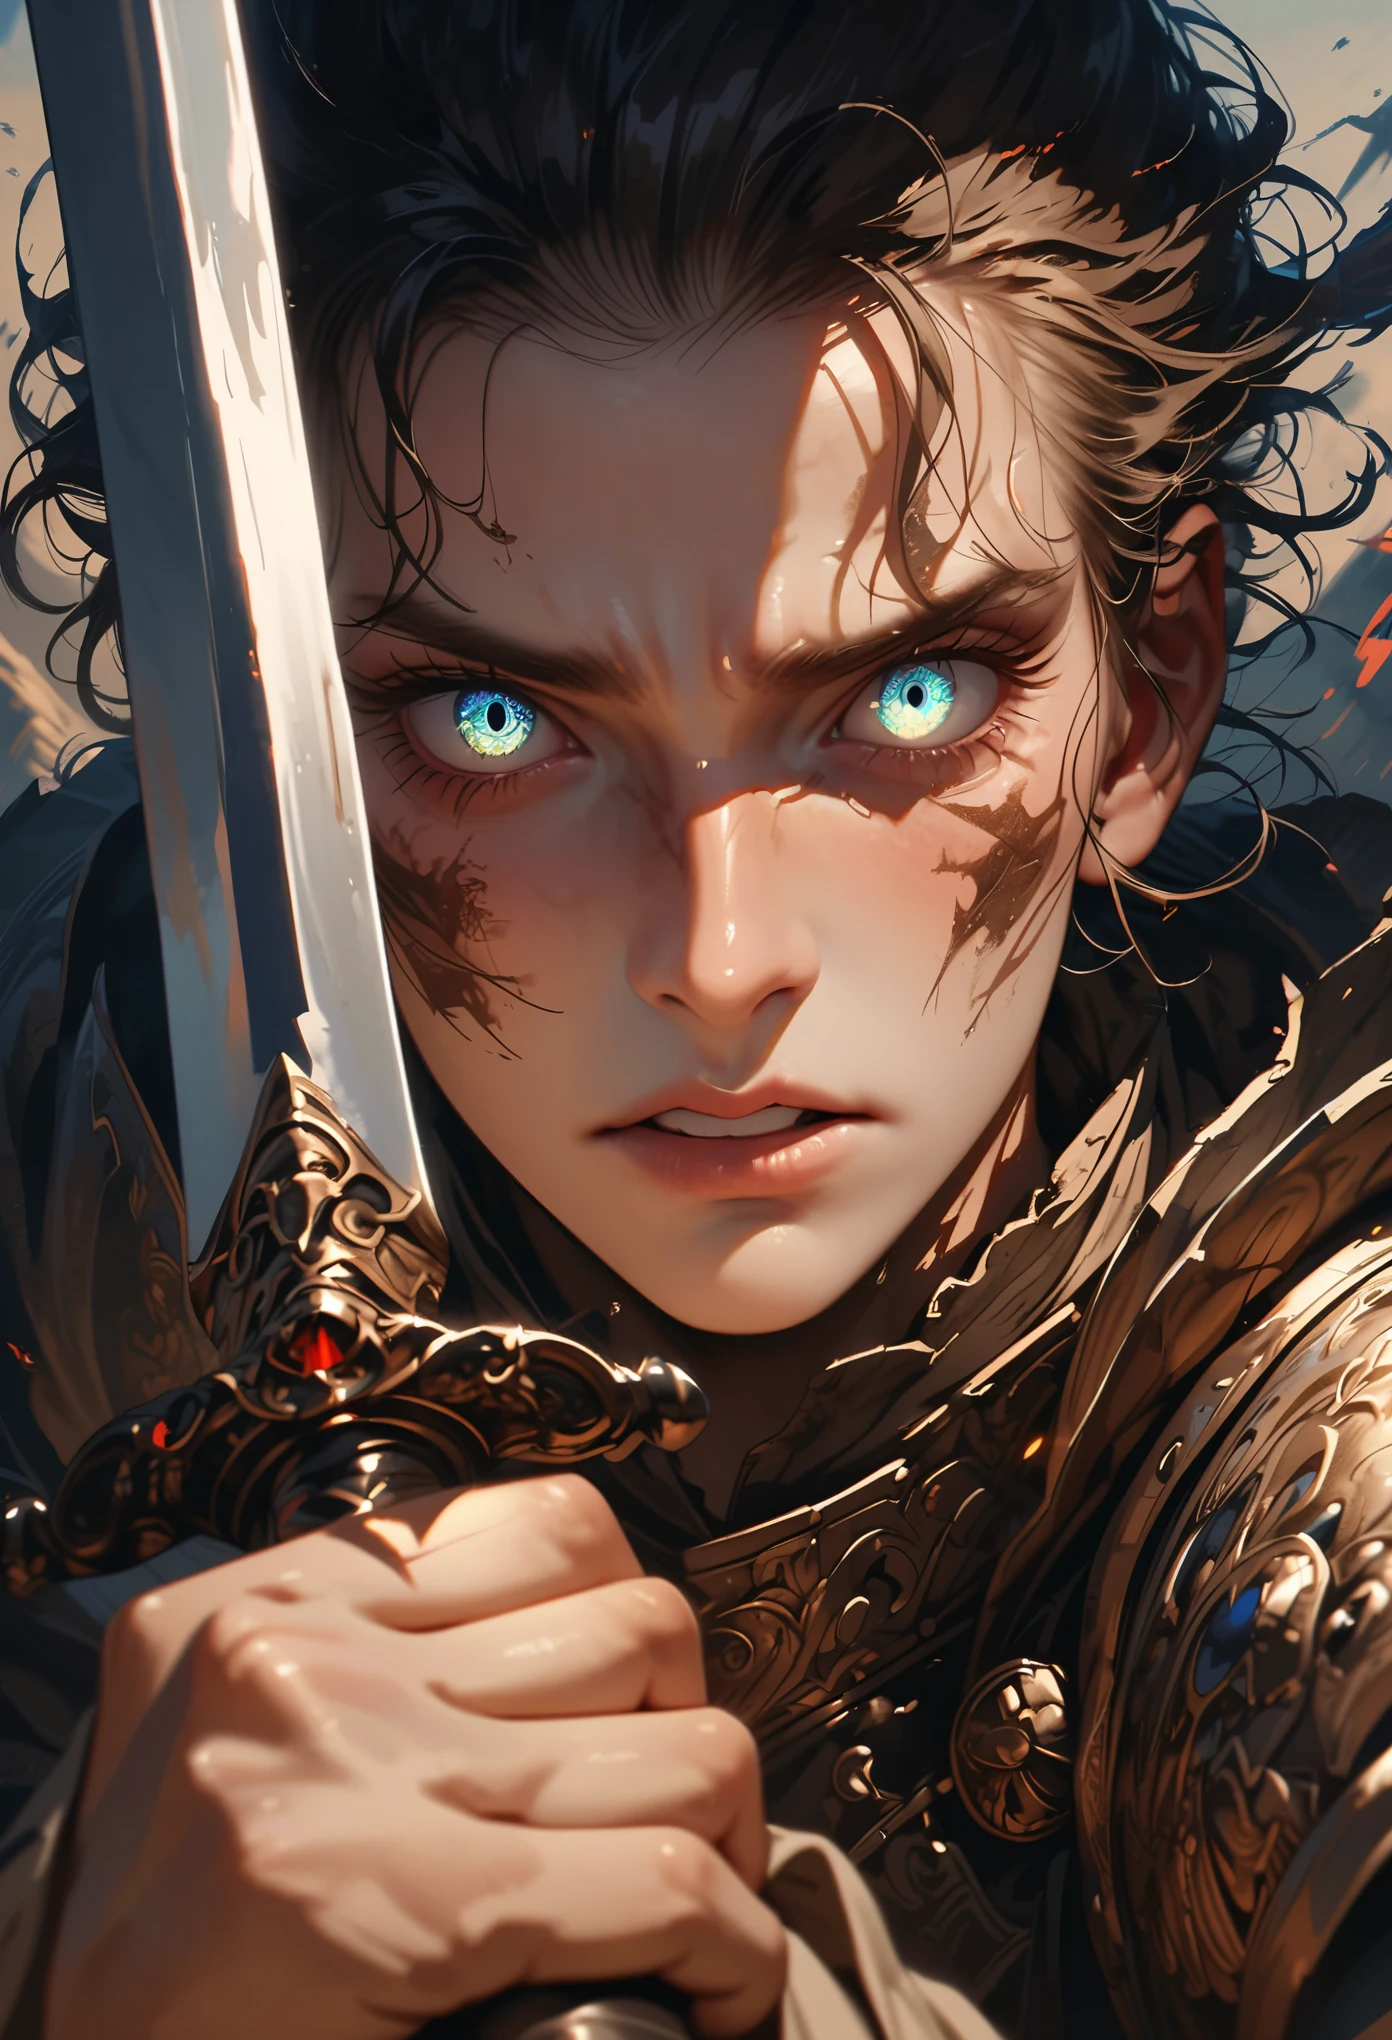 (best quality,4k,8k,highres,masterpiece:1.2),ultra-detailed,portrait of a general with a sword (beautiful detailed eyes,beautiful detailed lips,extremely detailed eyes and face,longeyelashes),holding a sword with both hands,committing seppuku,dramatic and intense expression,shiny and sharp sword,detailed armor,medieval battlefield in the background,historical-war painting style,contrasting light and shadow,warrior spirit,strong and determined,sepia tone.